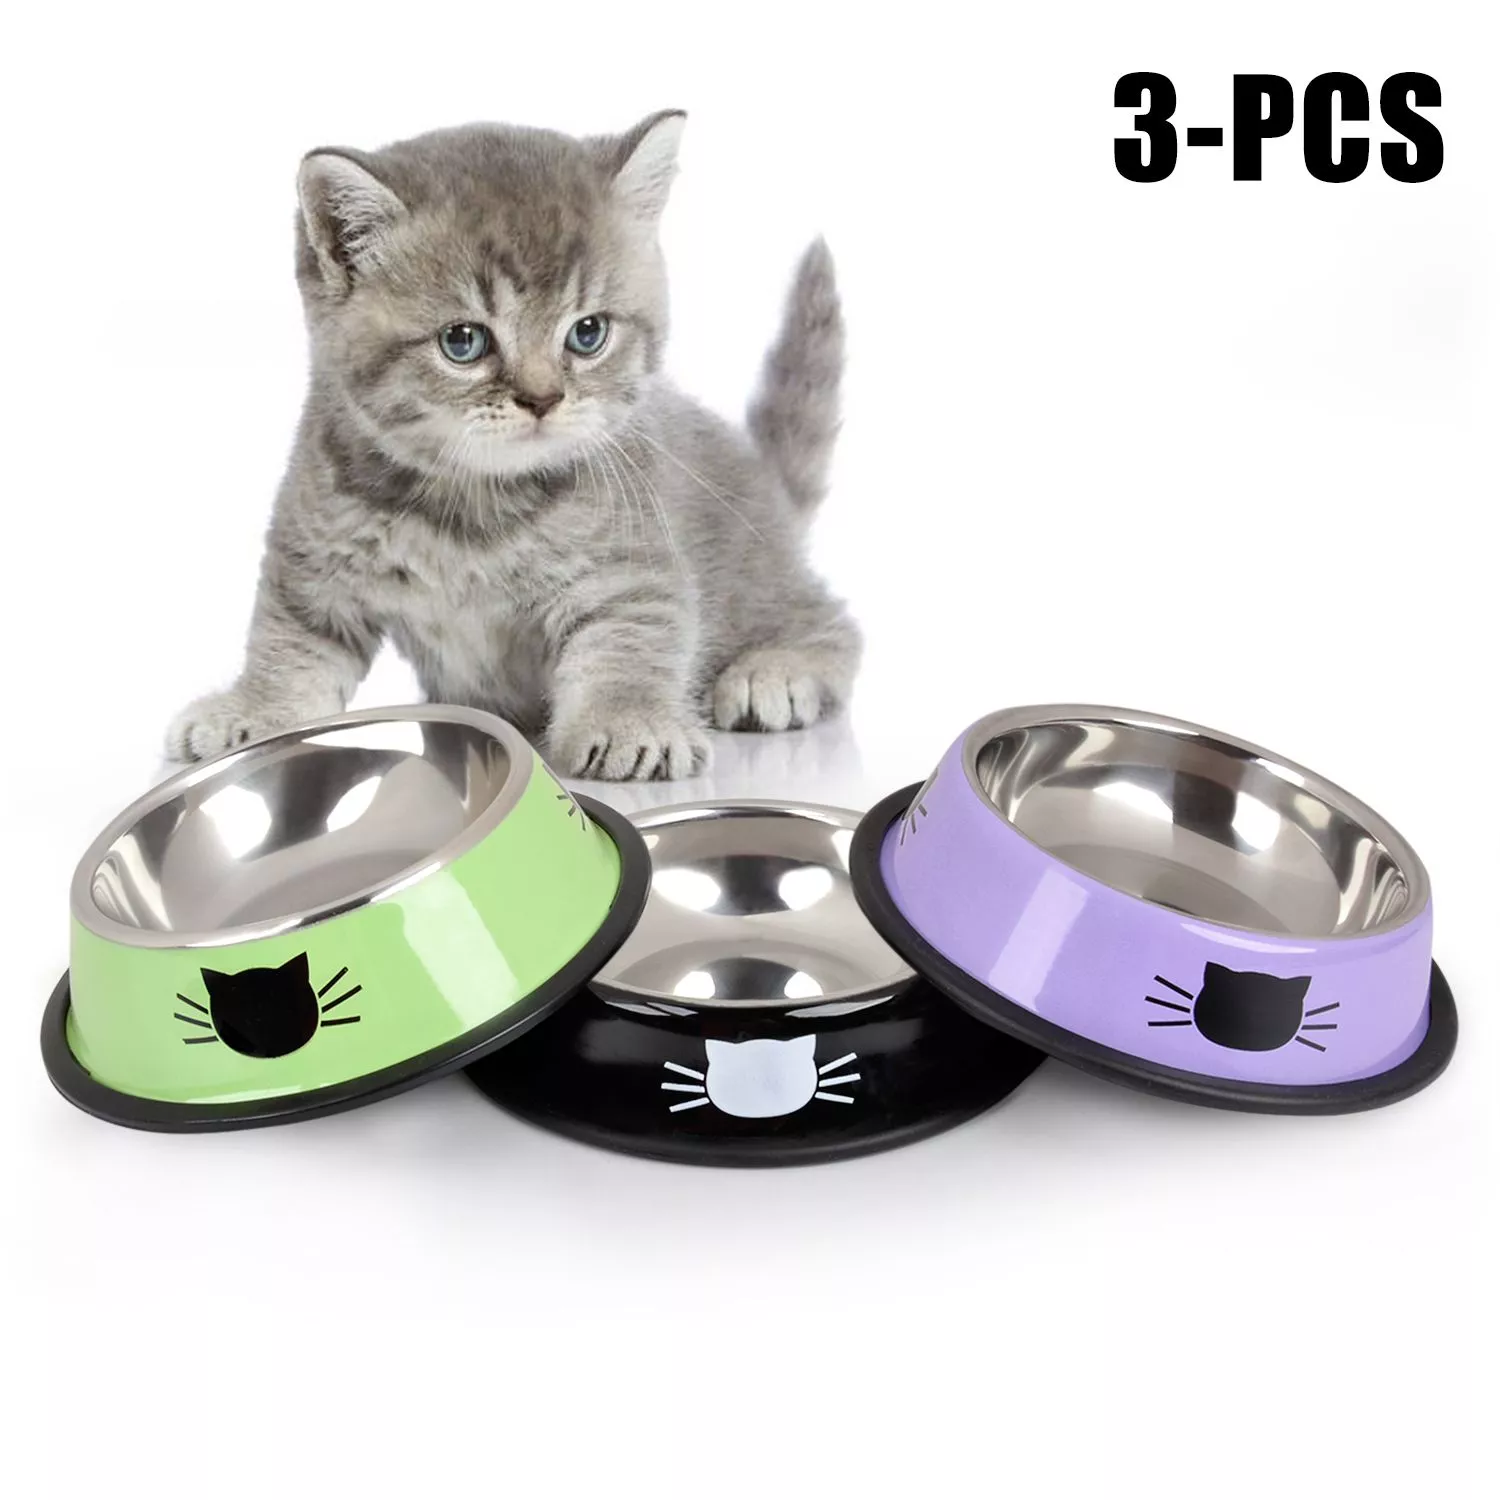 new-pet-product-for-dog-cat-bowl-stainless-steel-anti-skid-pet-dog-cat-food-water-bowl